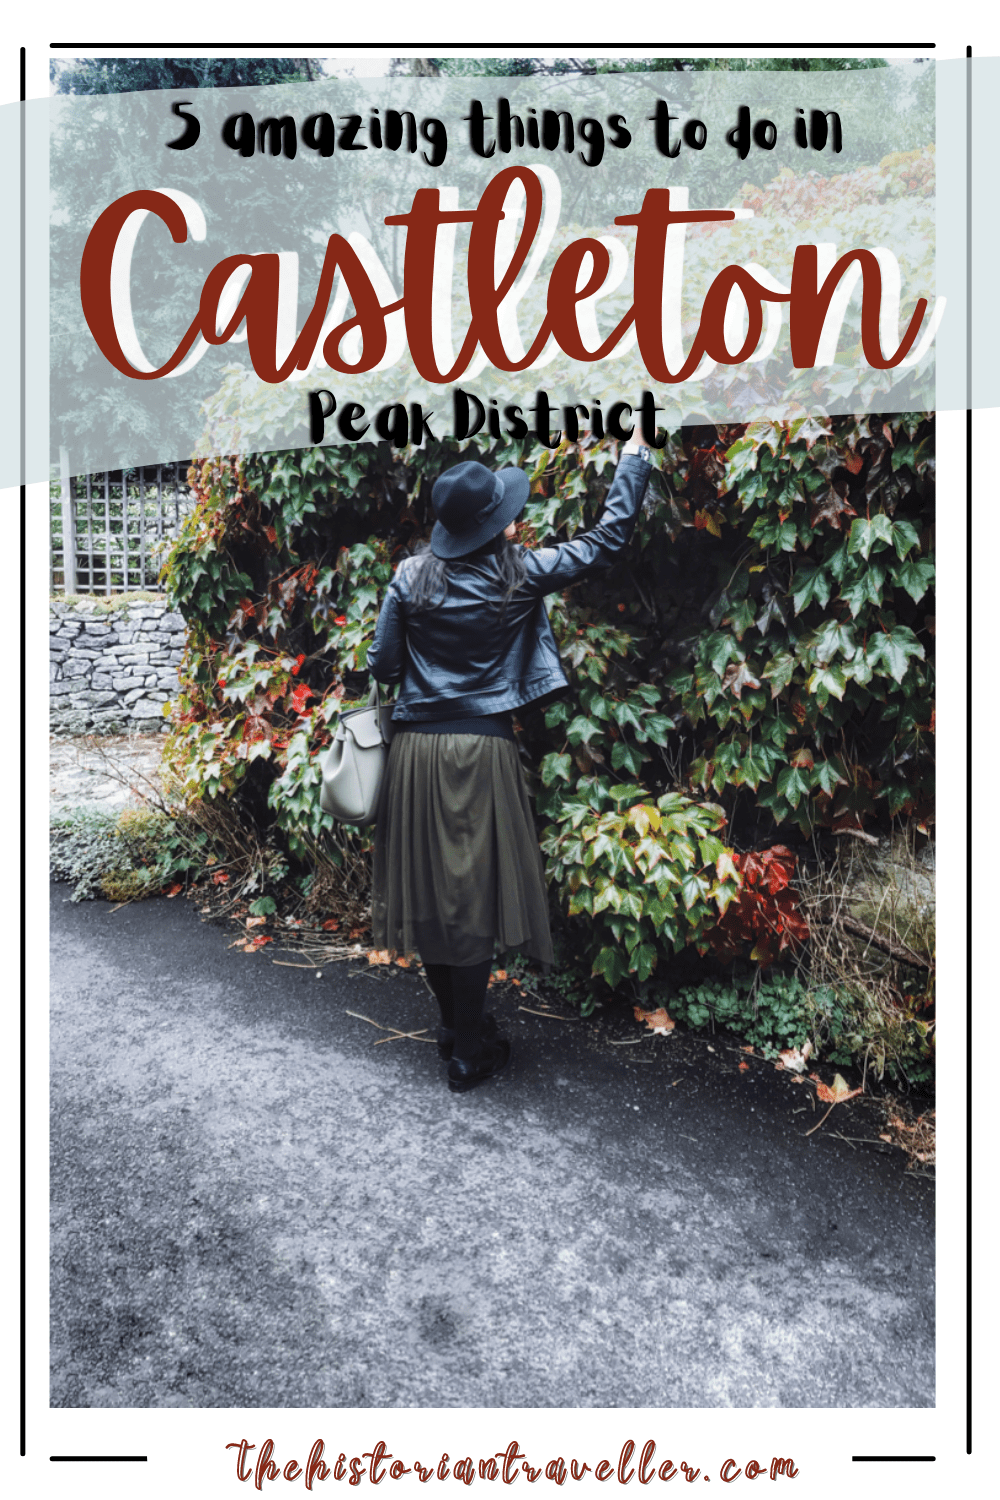  5 amazing things to do in Castleton